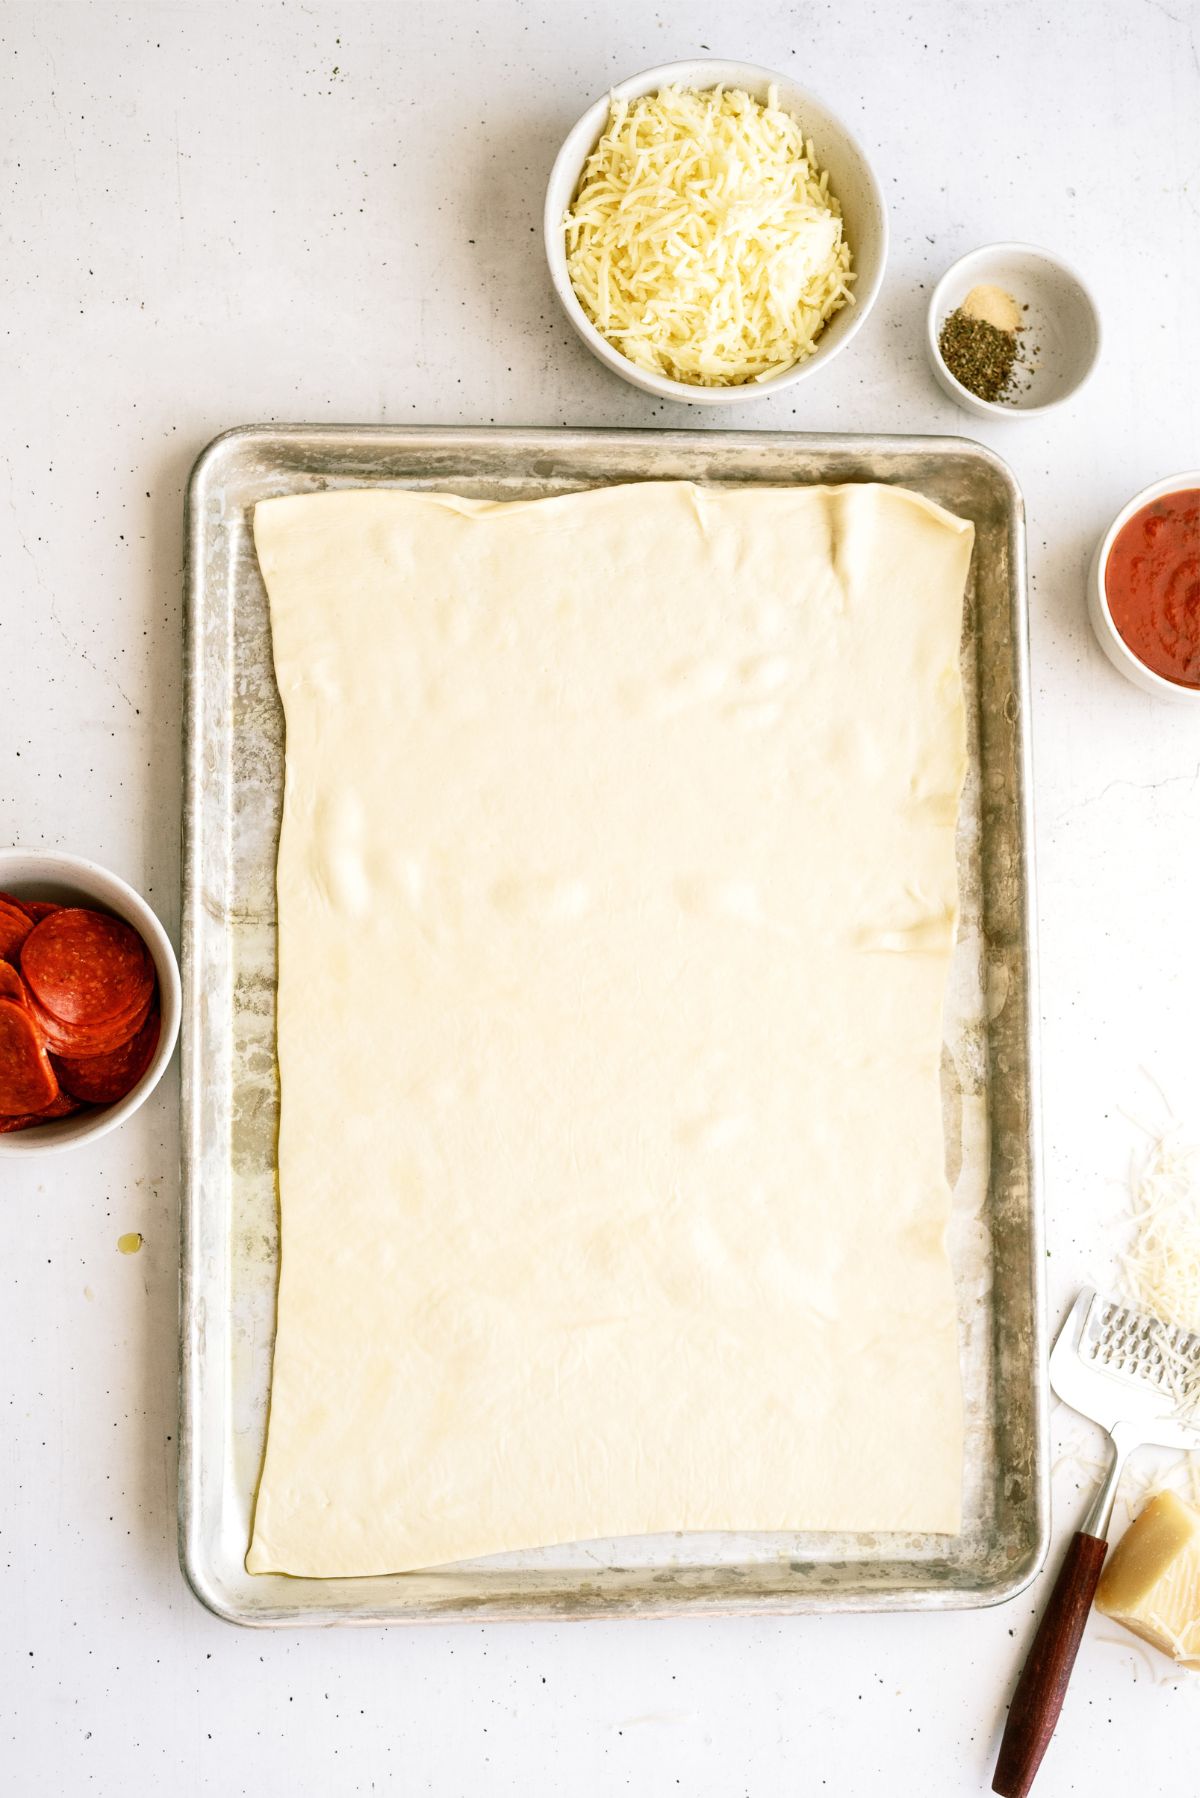 Pizza dough spread out on baking sheet